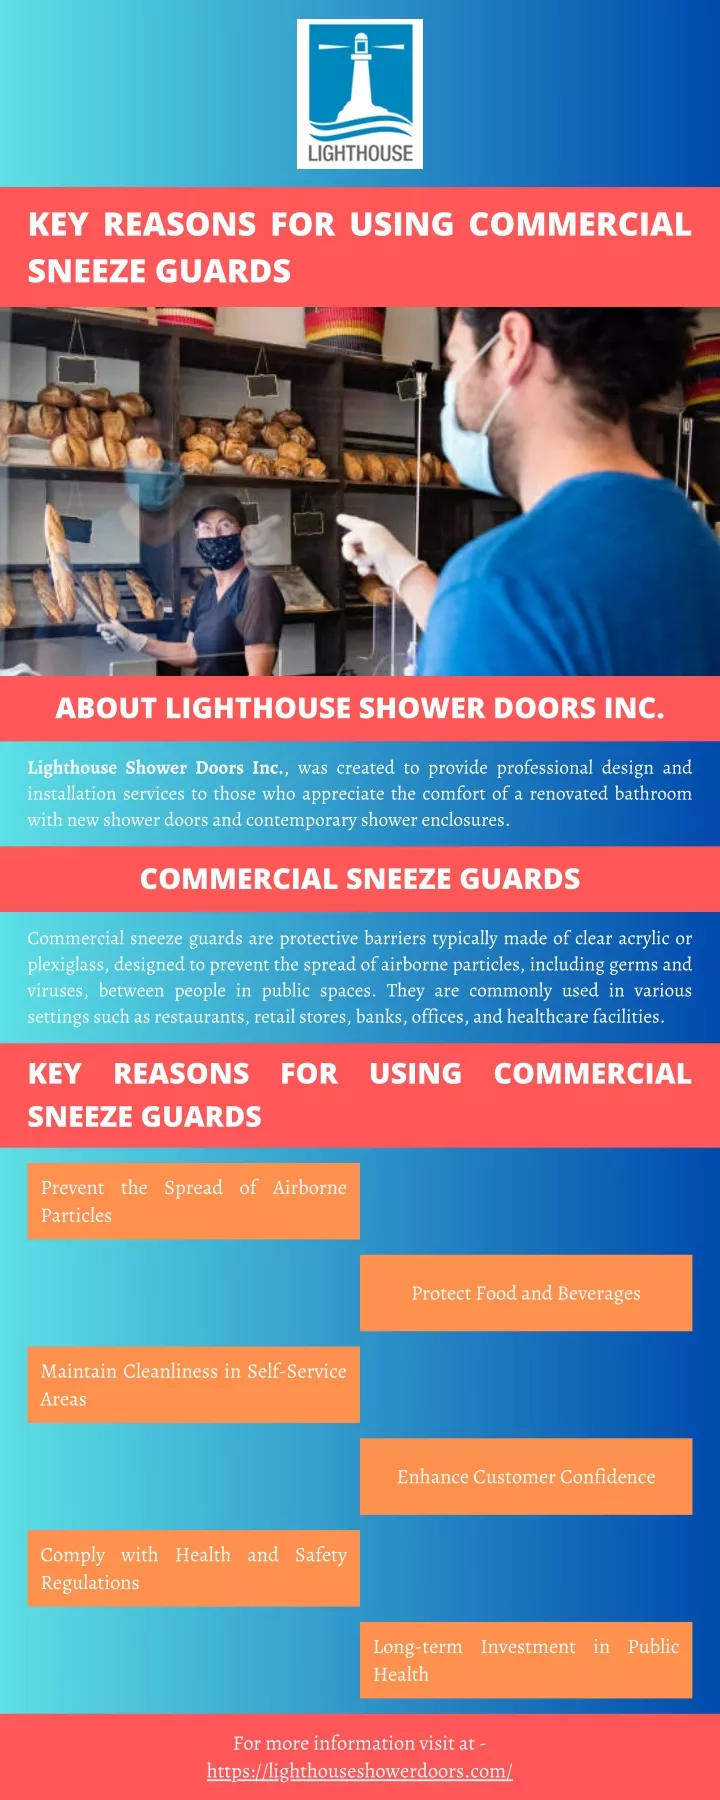 key reasons for using commercial sneeze guards